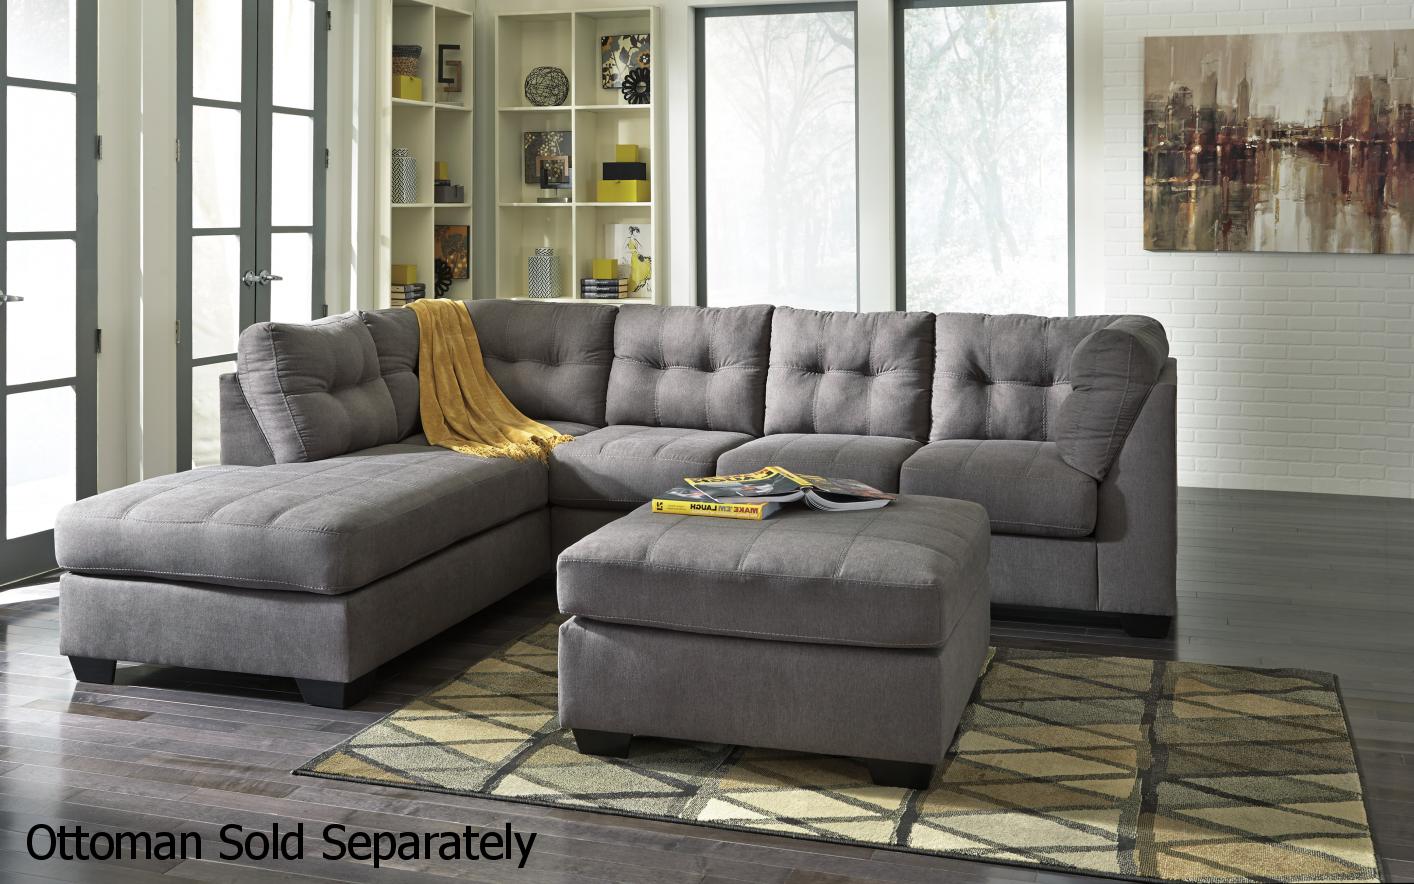 Grey Fabric Sectional Sofa - Steal-A-Sofa Furniture Outlet Los Angeles CA